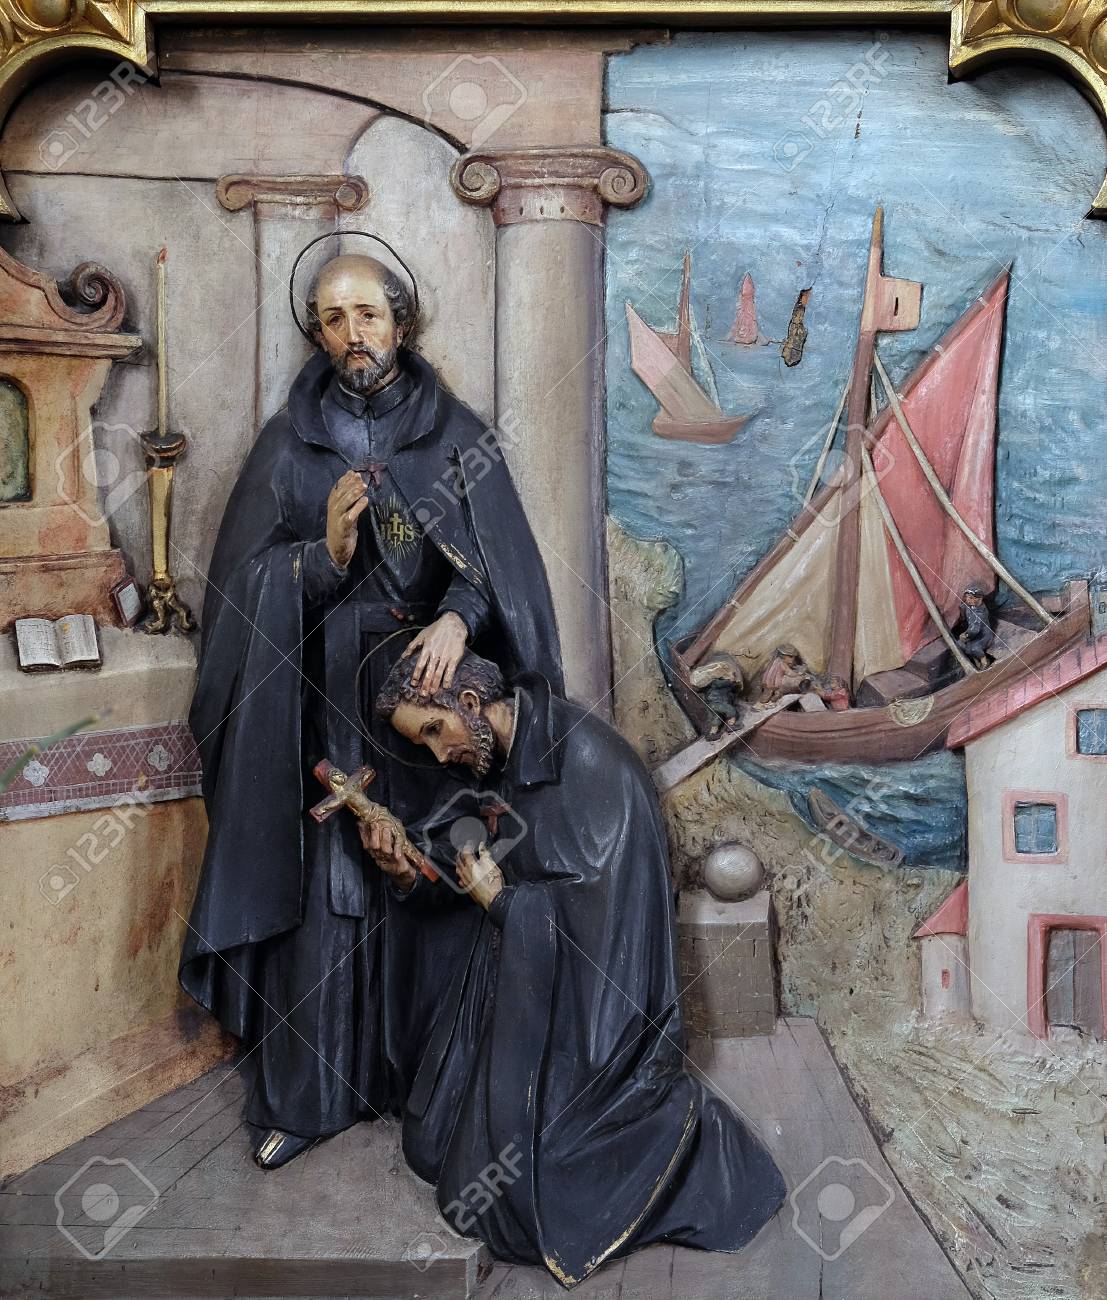 St.Ignatius sends St. Francis Xavier to the missions. Source: 123rf.com